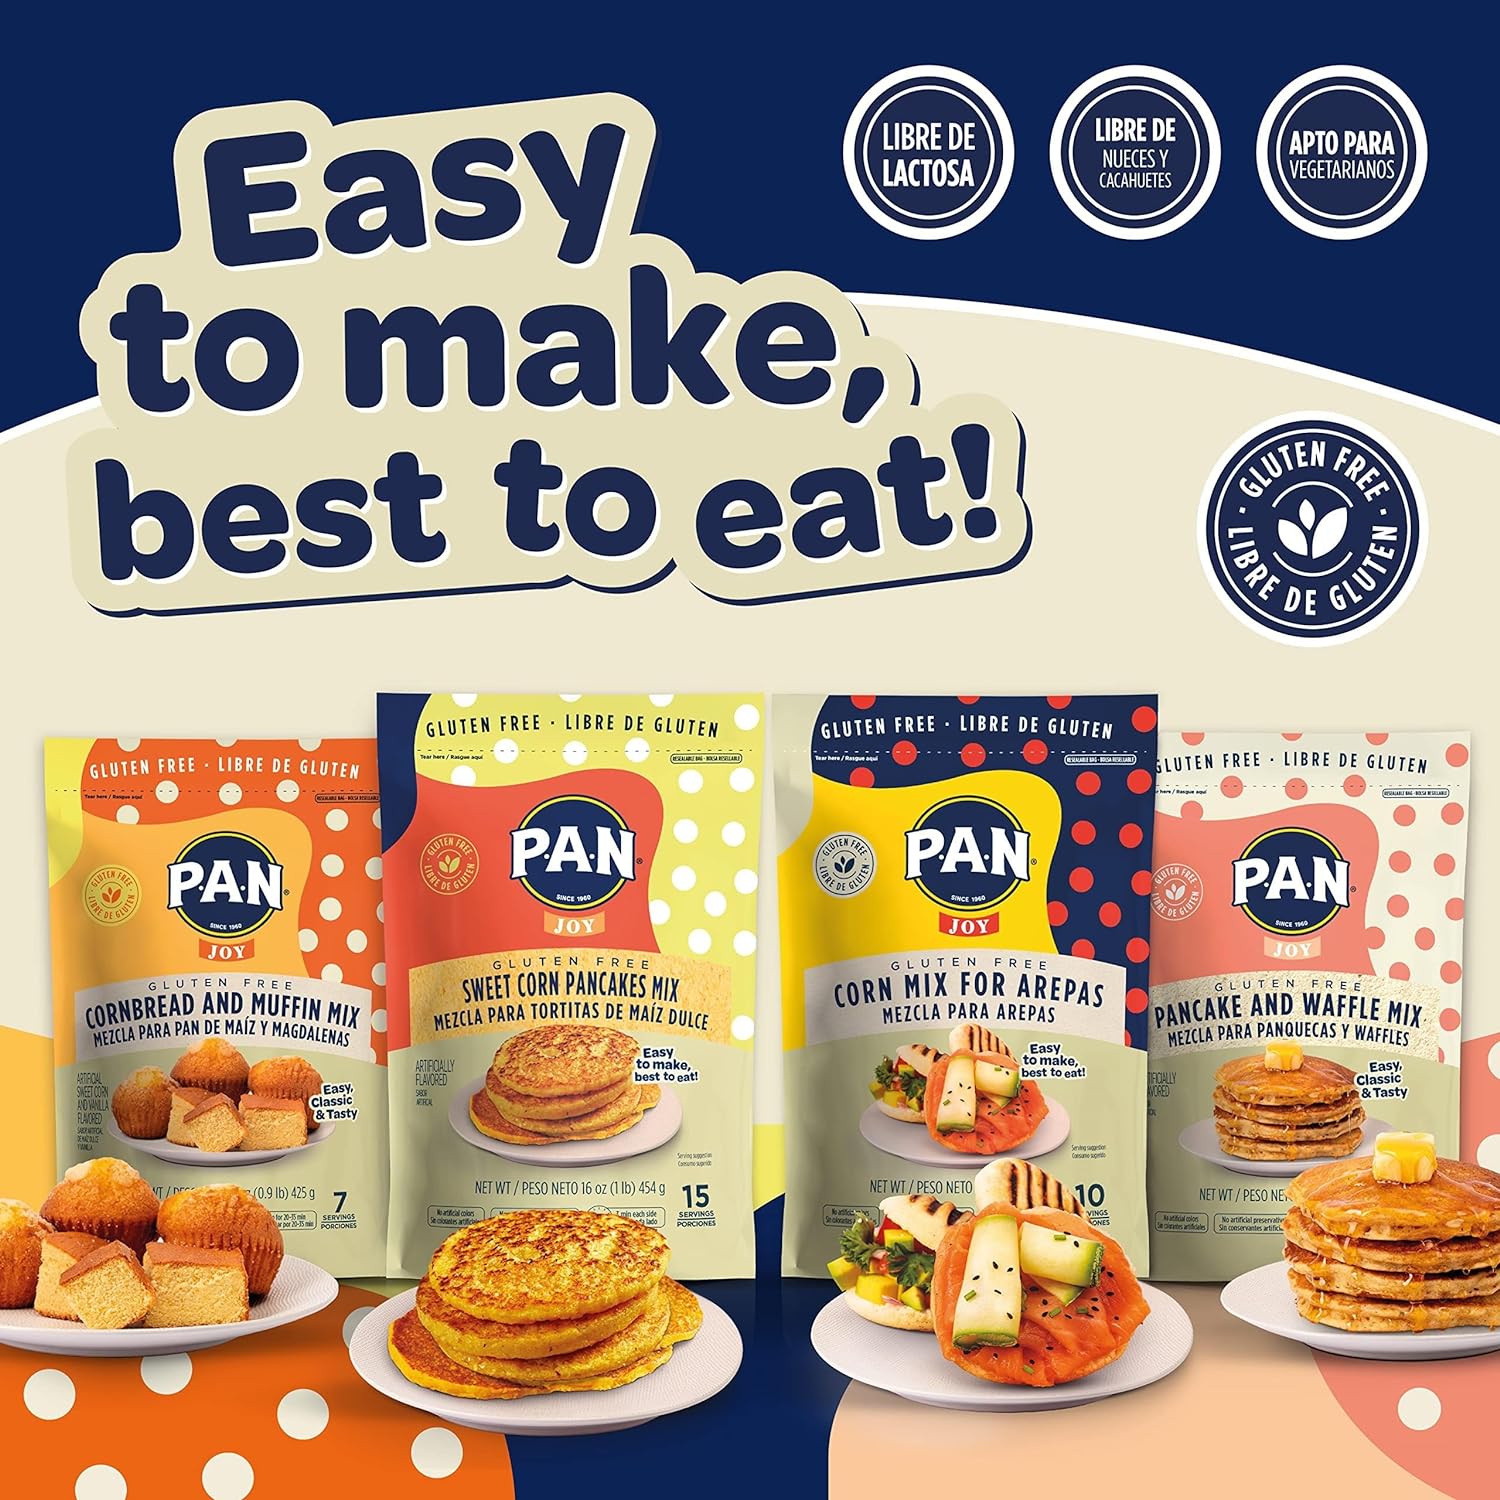 P.A.N Pancake and Waffle Mix – Gluten Free 1 lb. (6 Pack) : Grocery & Gourmet Food